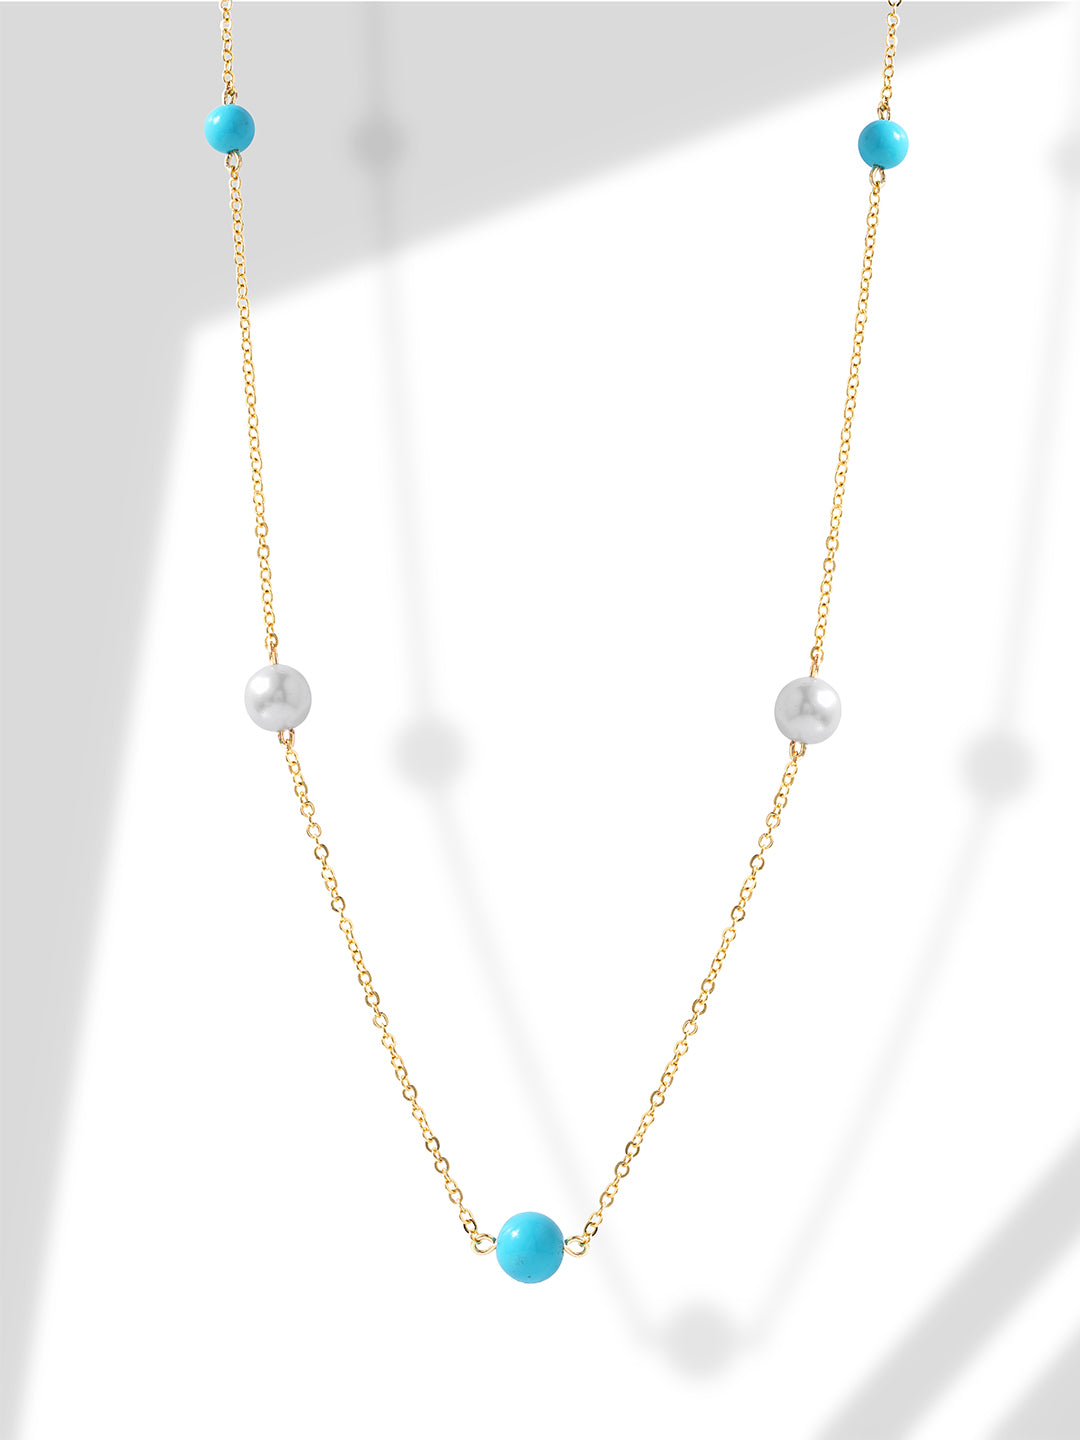 Womens White Gold Plated Pearl Turquoise Bead Chain Necklace.